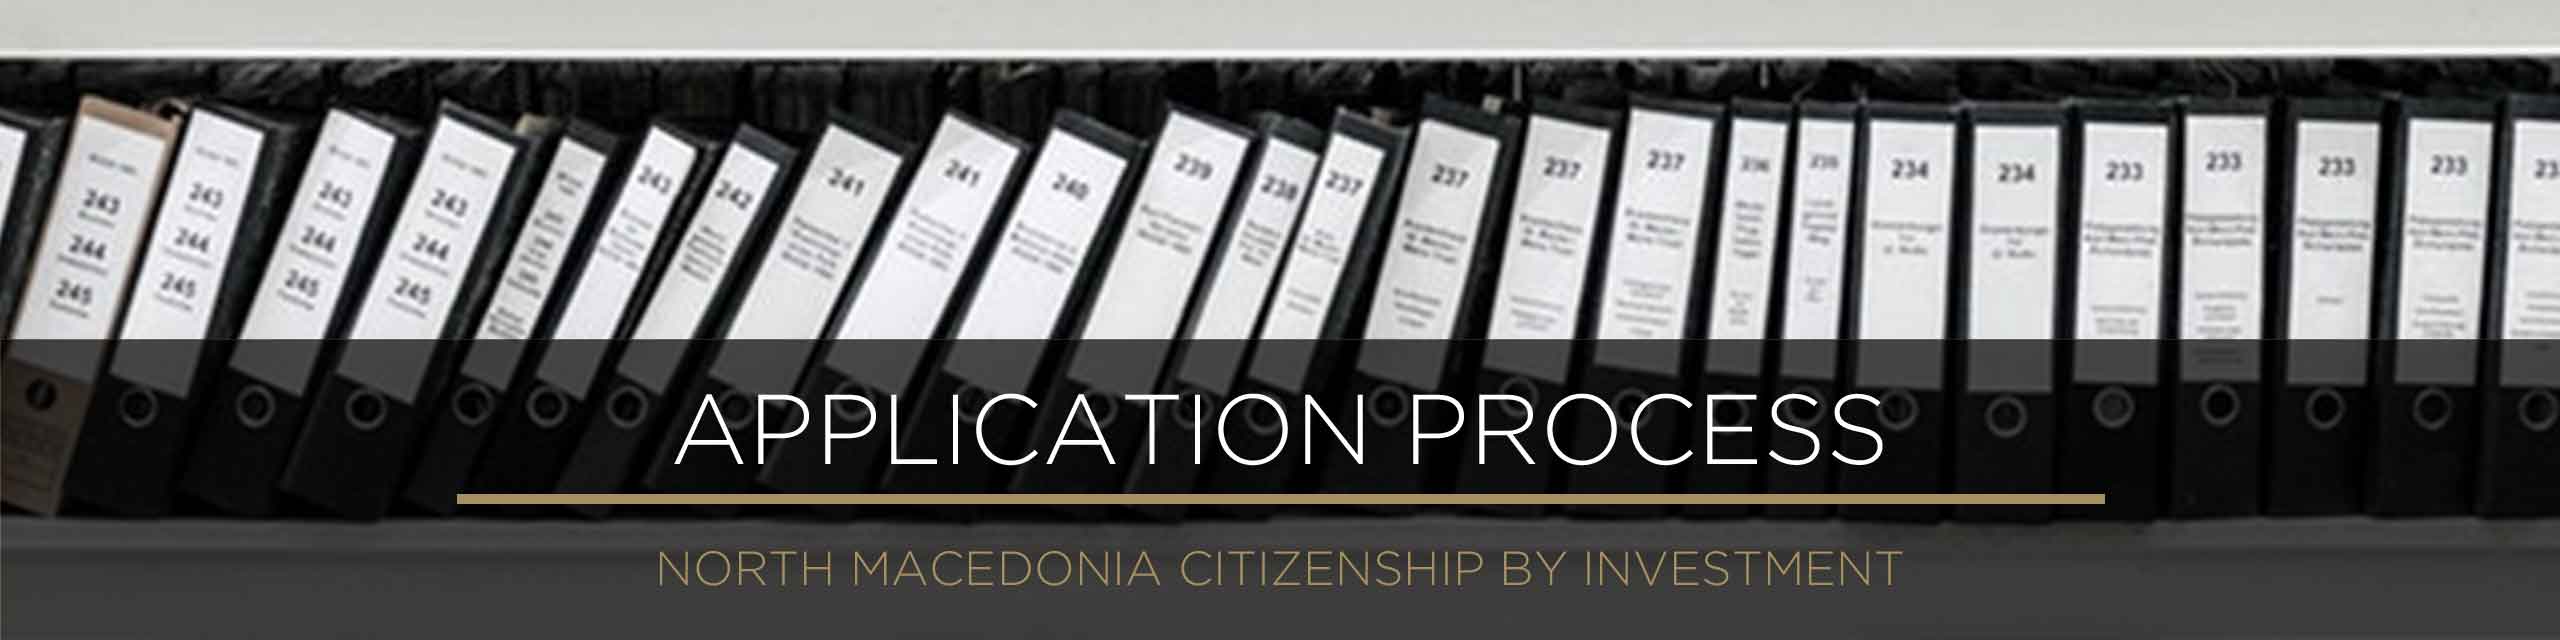 How to apply for North Macedonian citizenship - Application and Due Diligence Process